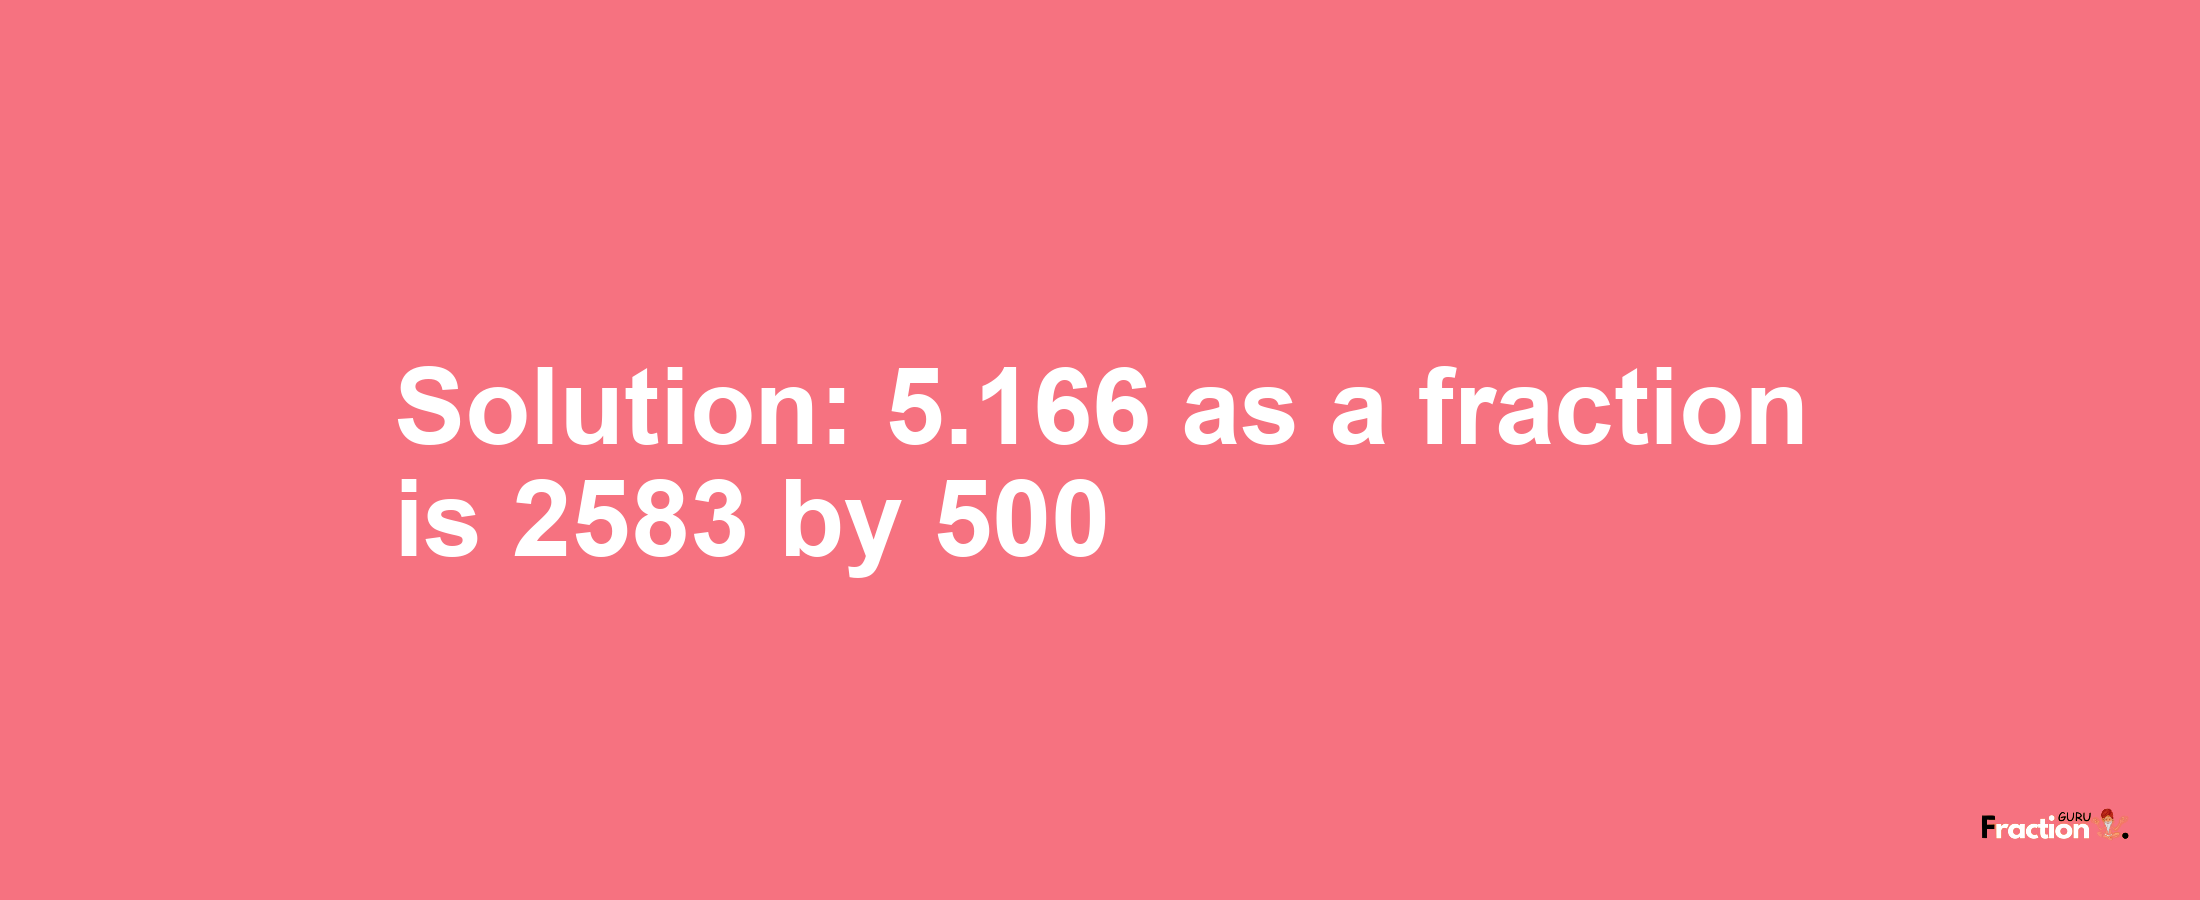 Solution:5.166 as a fraction is 2583/500